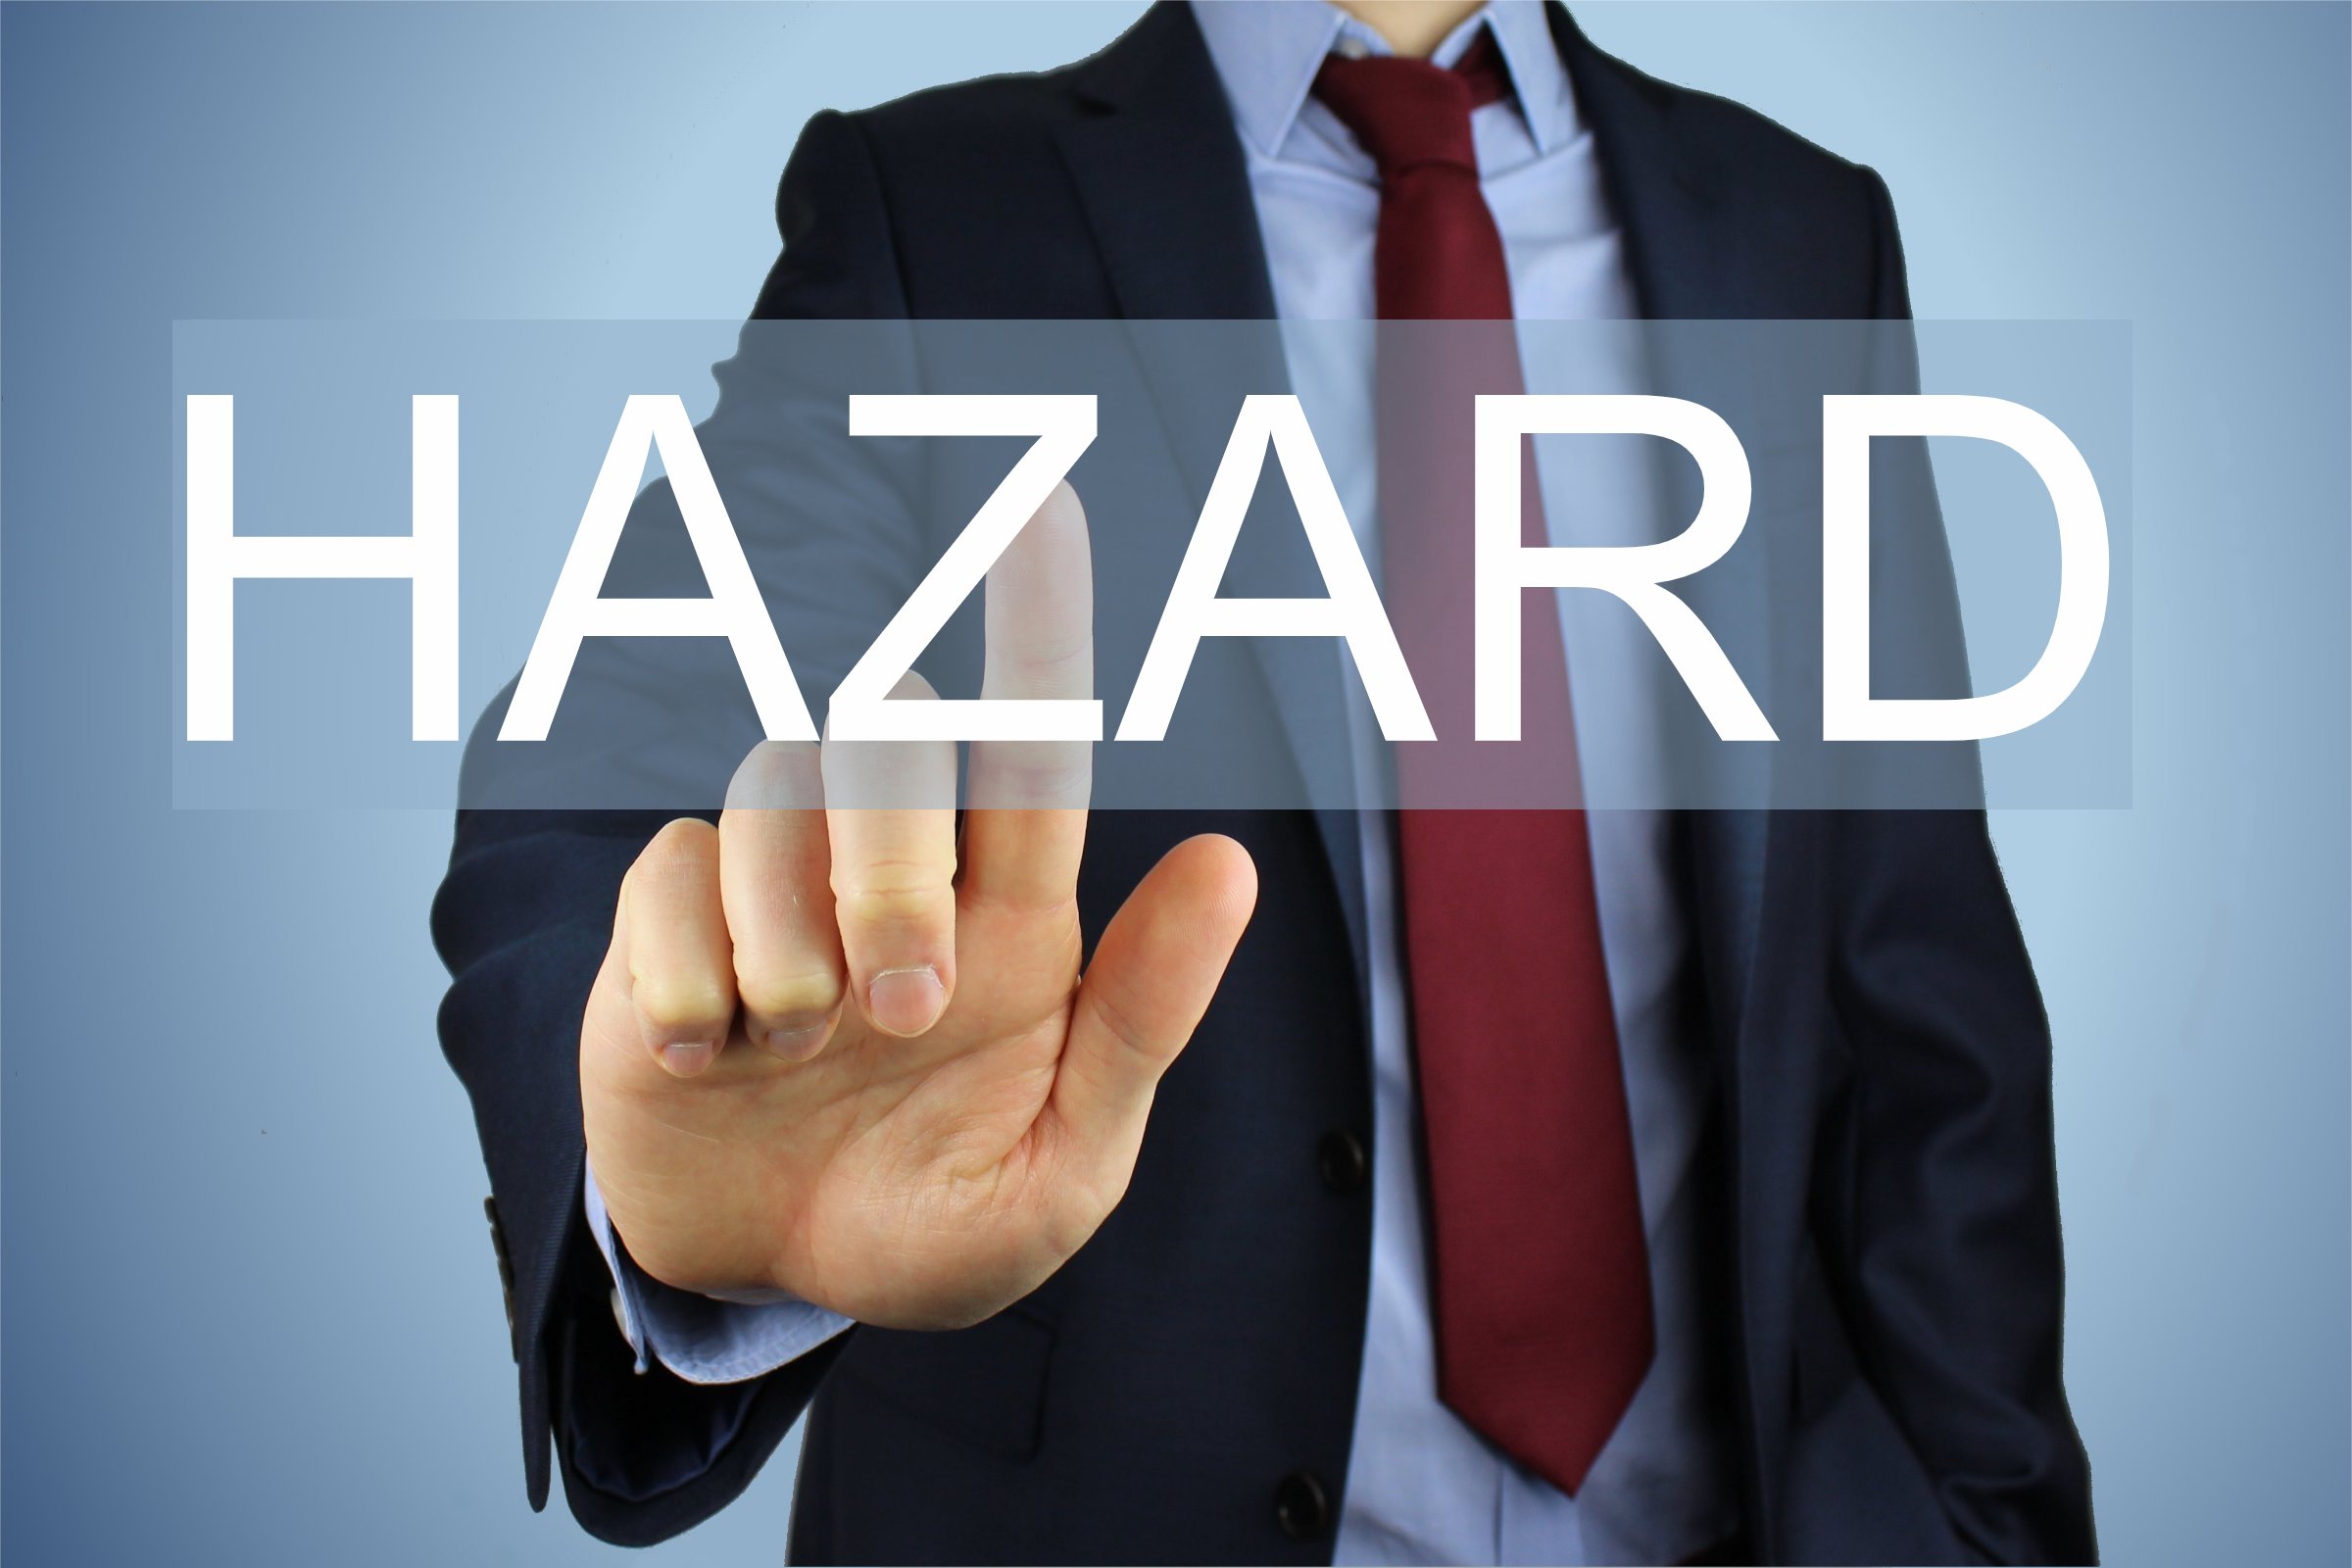 Hazard - Free of Charge Creative Commons Office worker pointing finger image